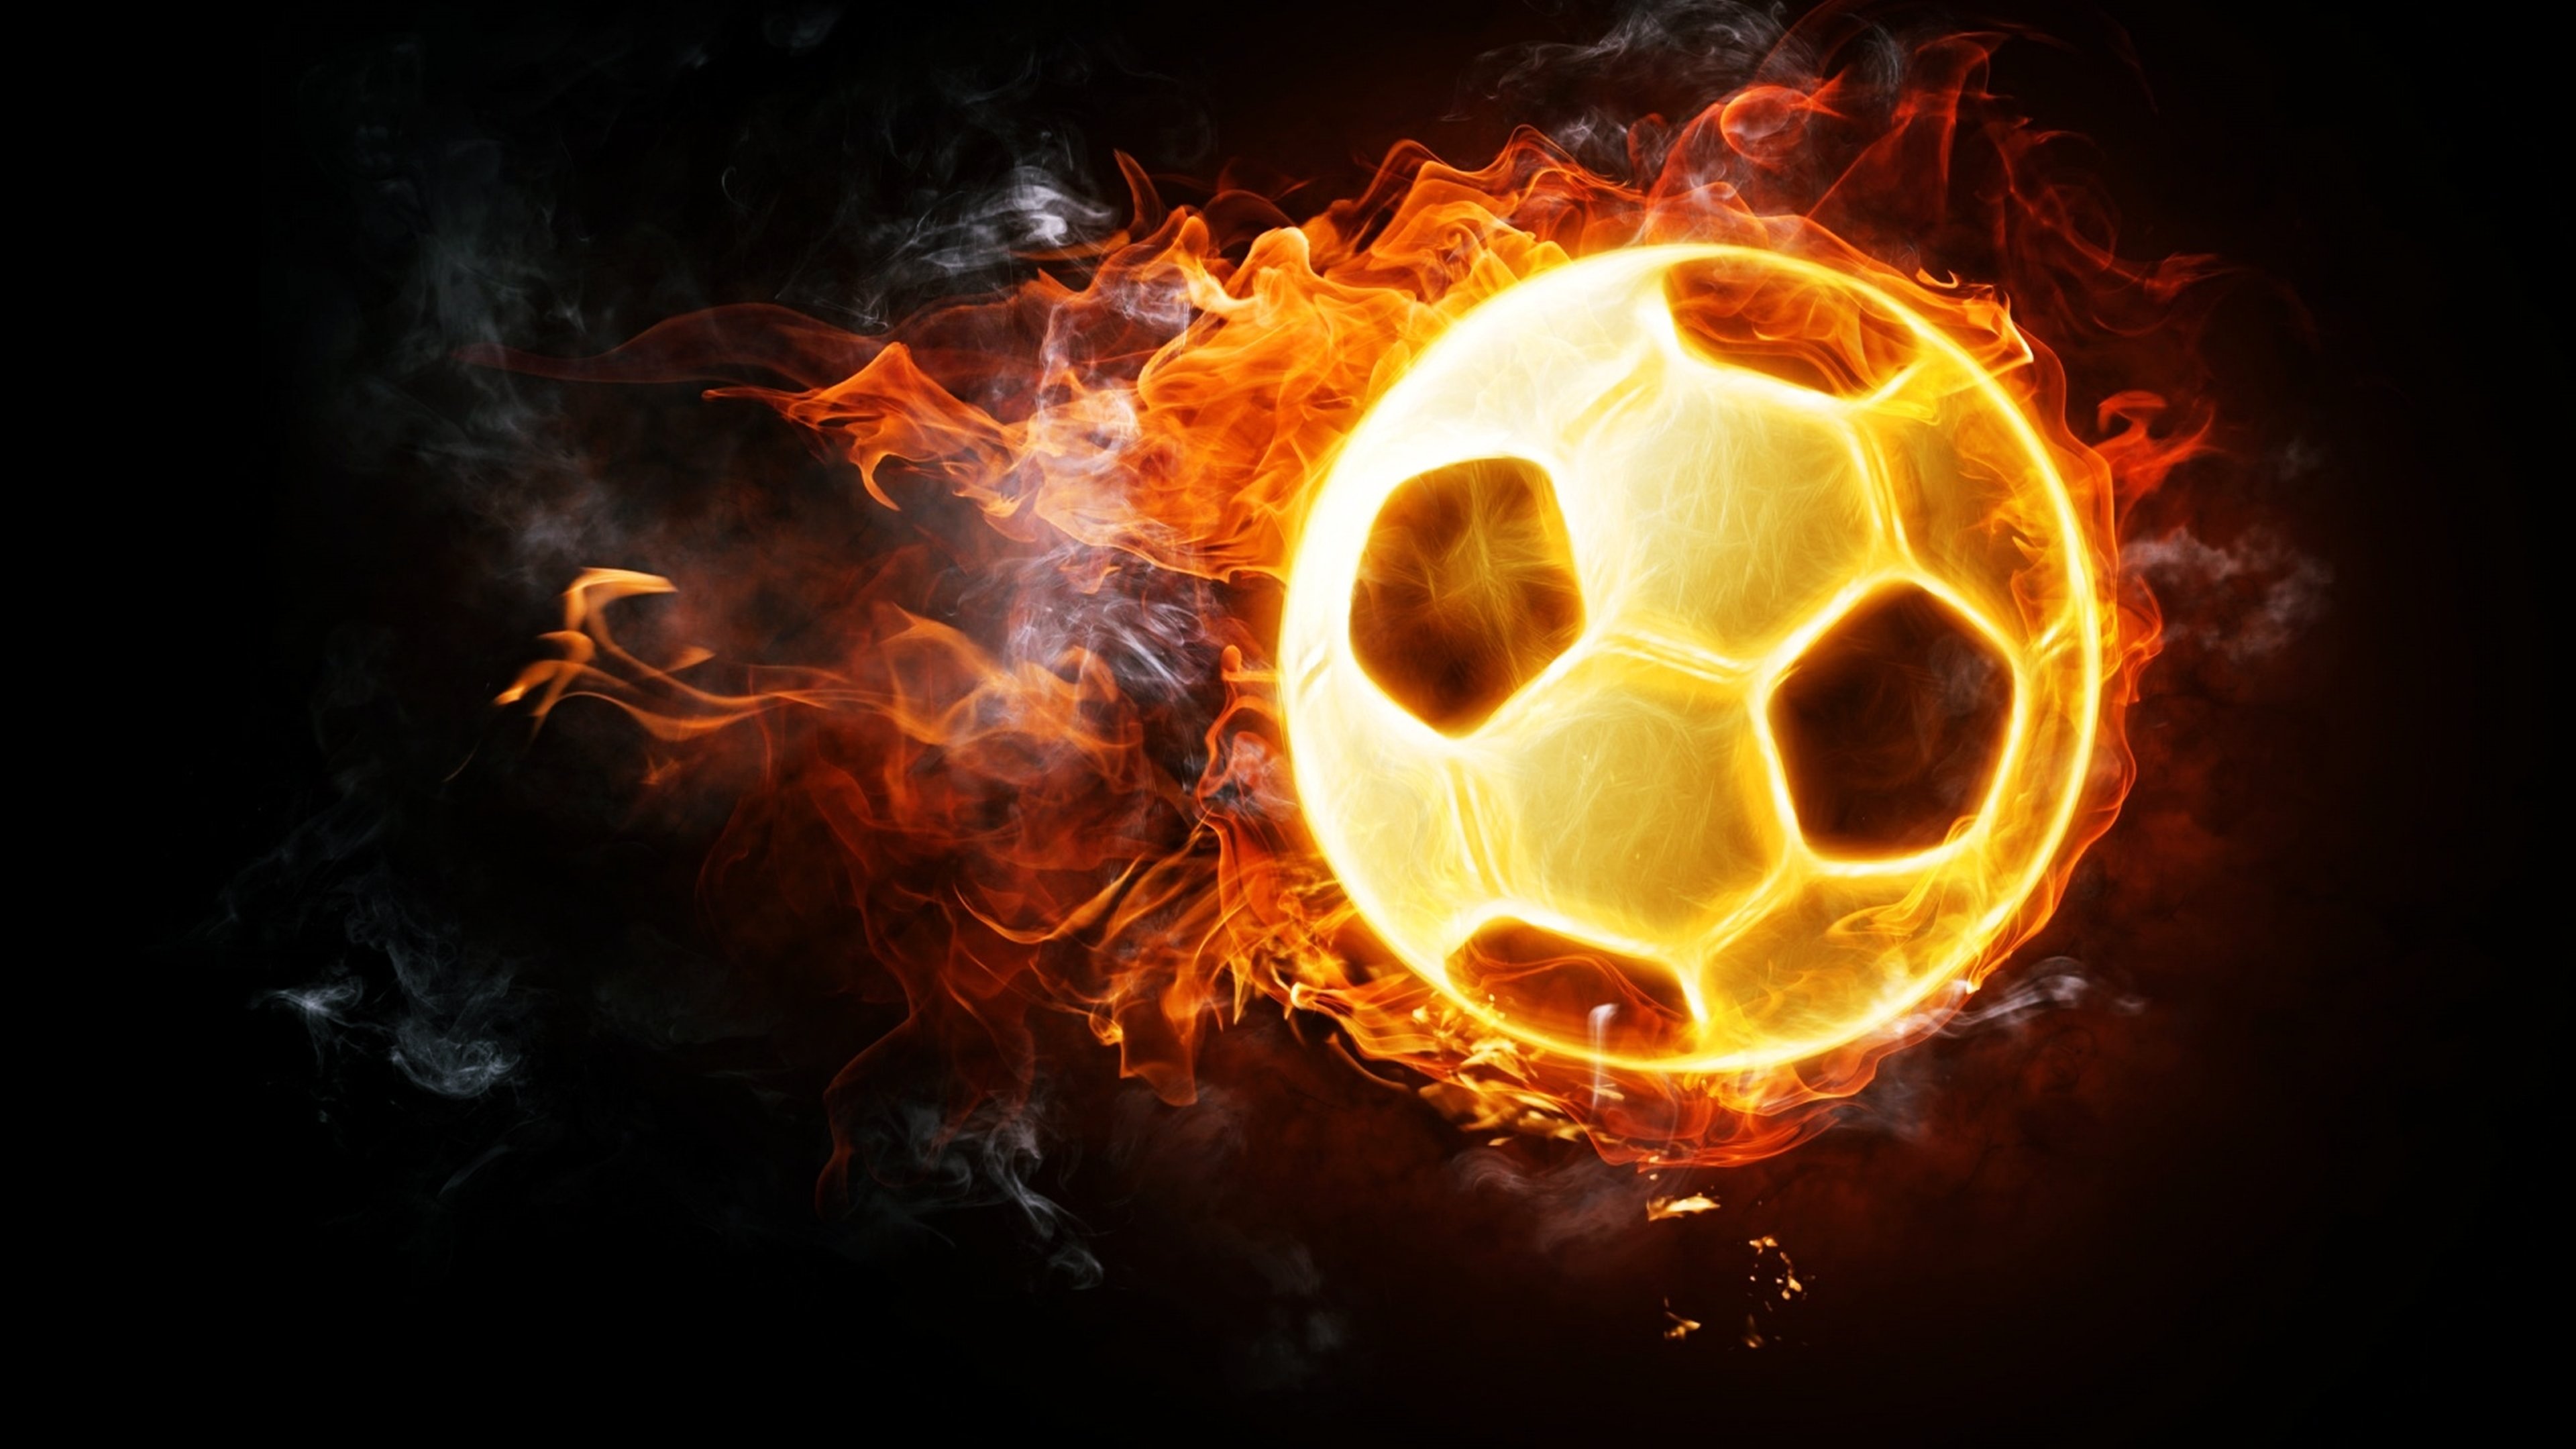 abstract, Art, Background, Fires, Football, Inflamed, Orange, Smoke, Wallpapers, Sports Wallpaper